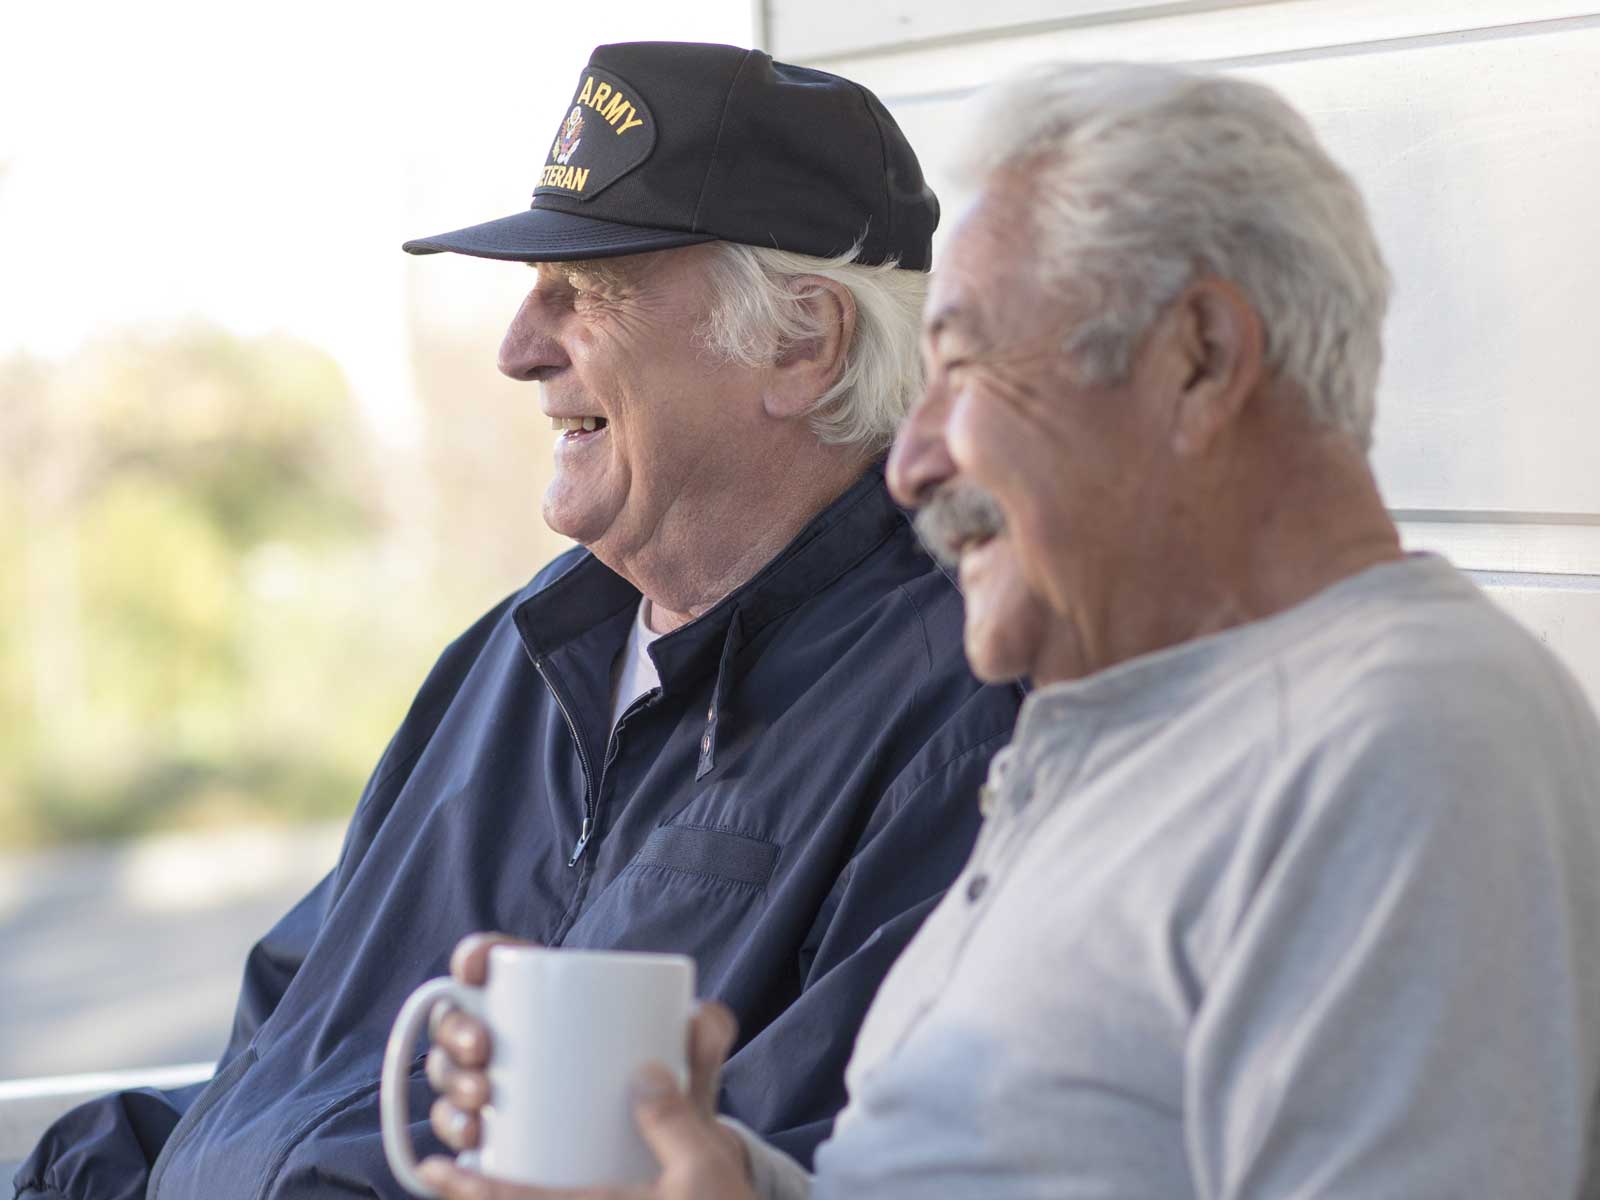 2 older men smiling and drinking coffee, 1 wearing a hat that reads “US Army Veteran.”